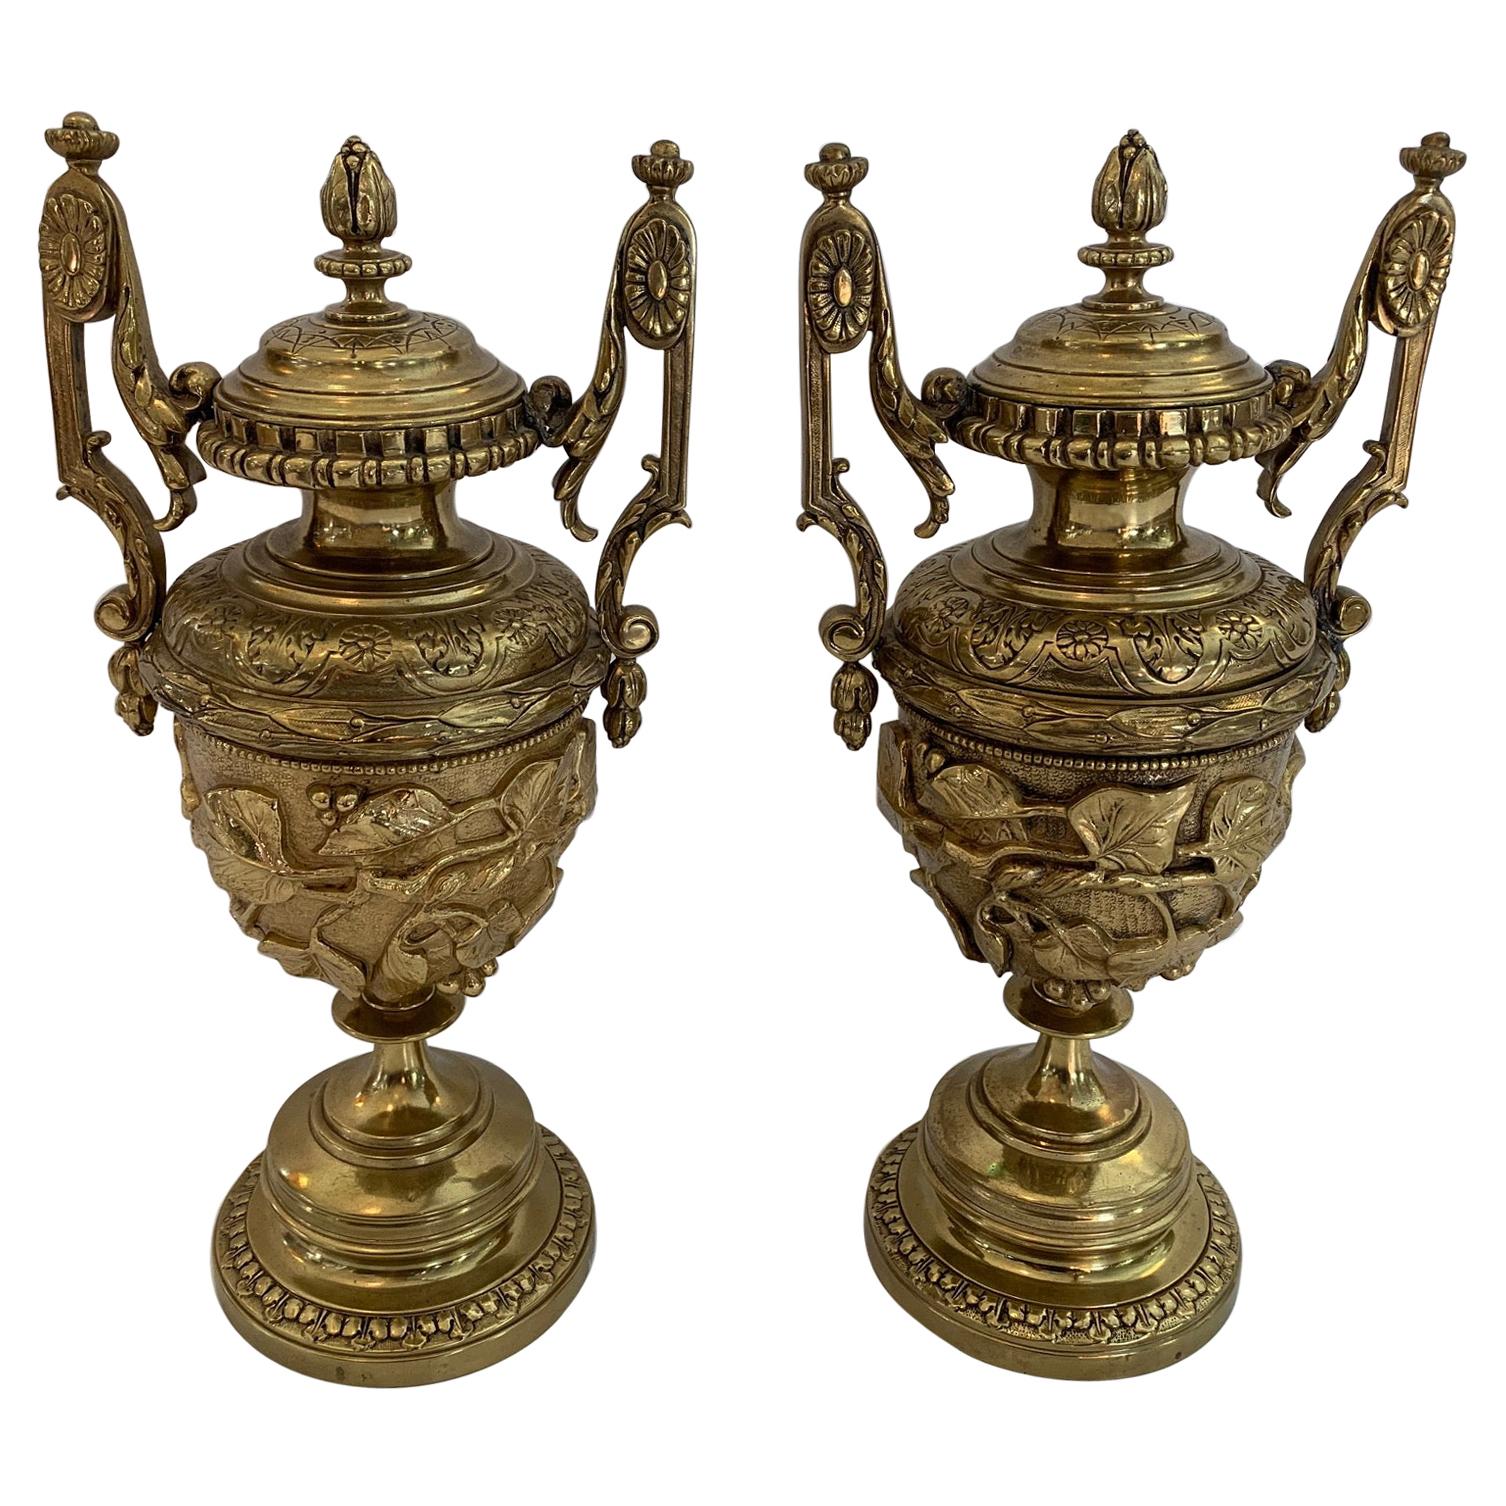 Gorgeous Ornate Pair of Revival Style Cast Brass Relief Lidded Urns For Sale